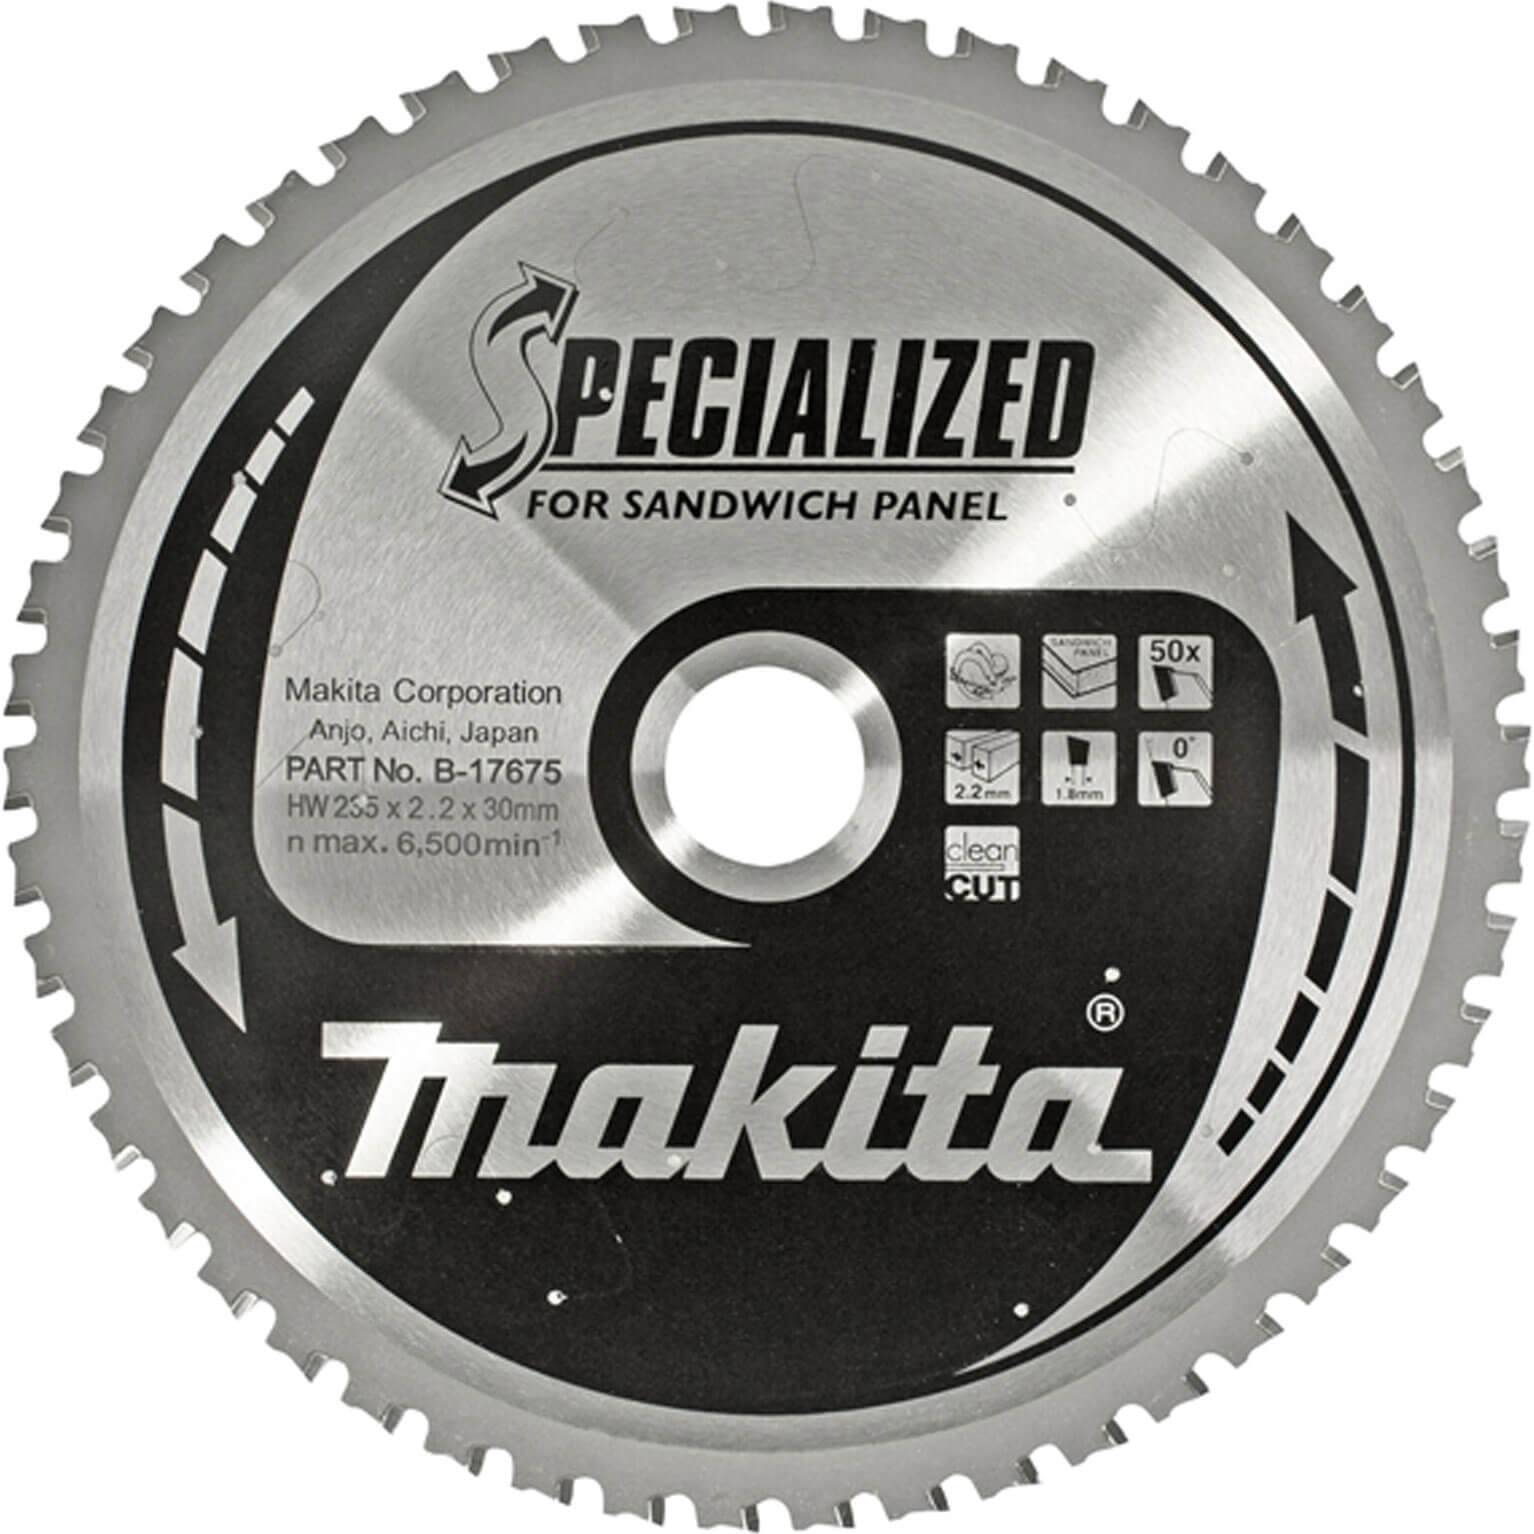 Photos - Power Tool Accessory Makita SPECIALIZED Sandwich Panel Cutting Saw Blade 235mm 50T 30mm B-17675 